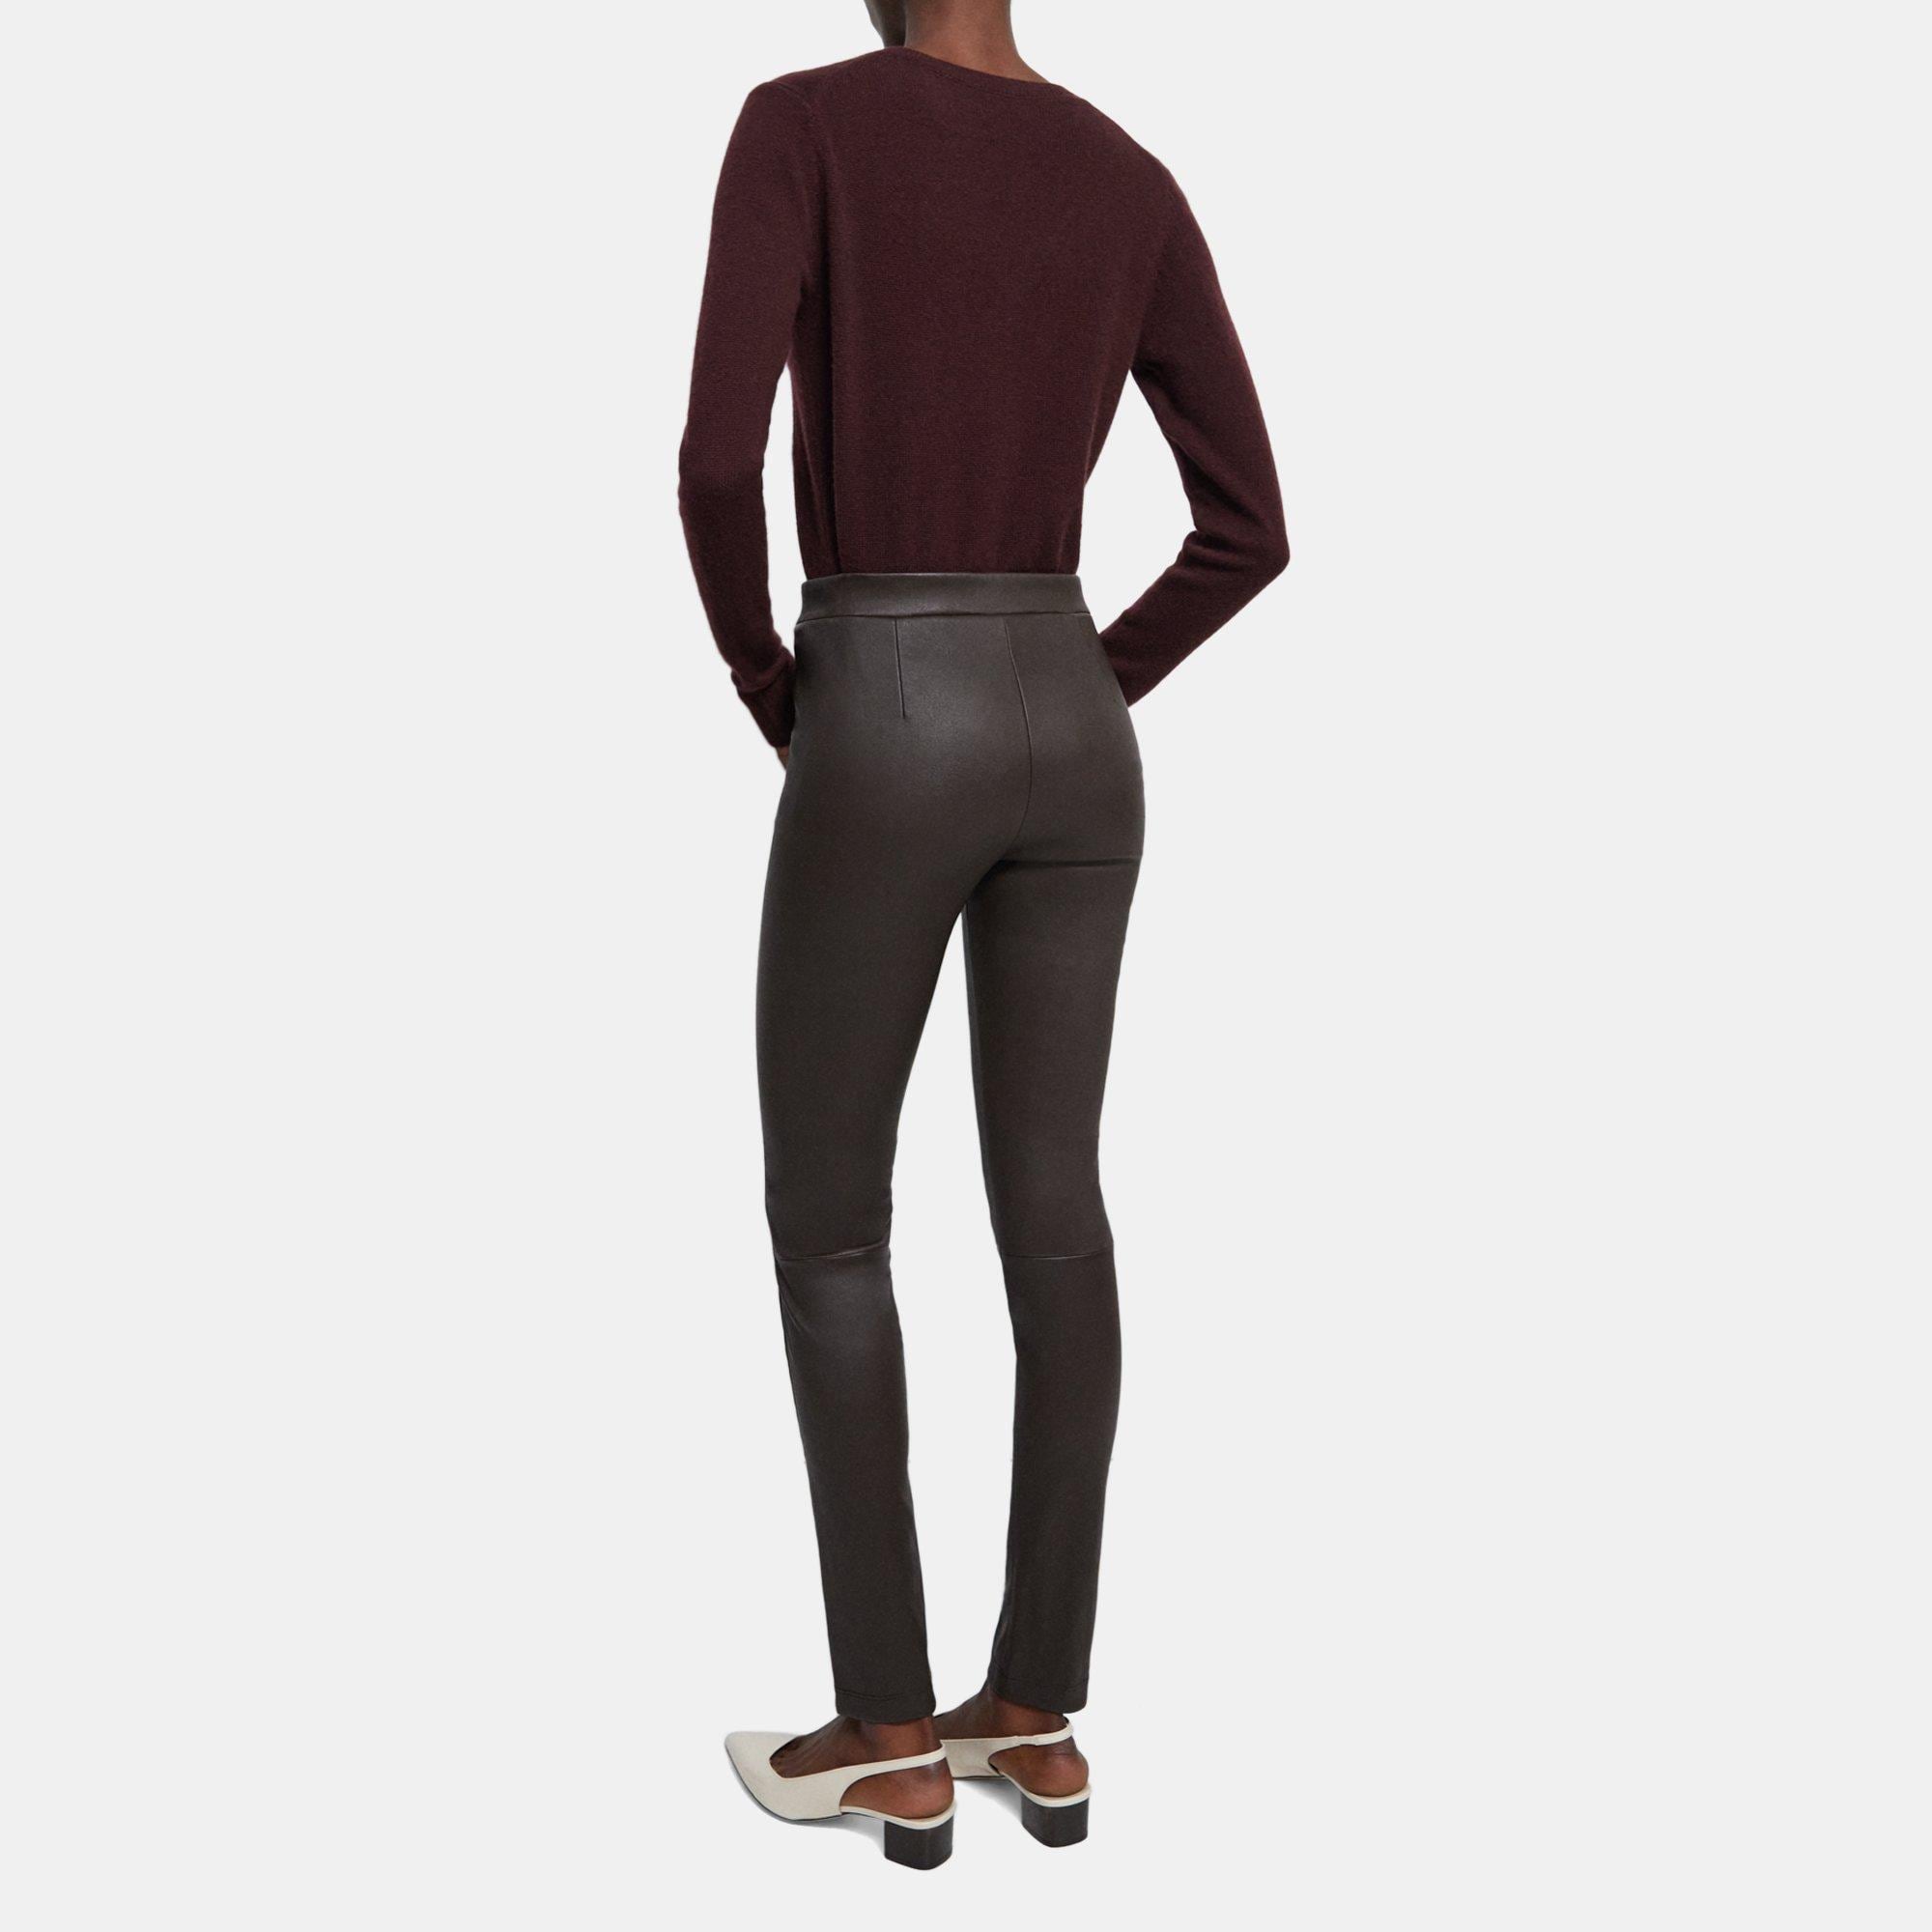 ESQUALO BROWN LEATHER LEGGINGS - Monkee's of Myrtle Beach